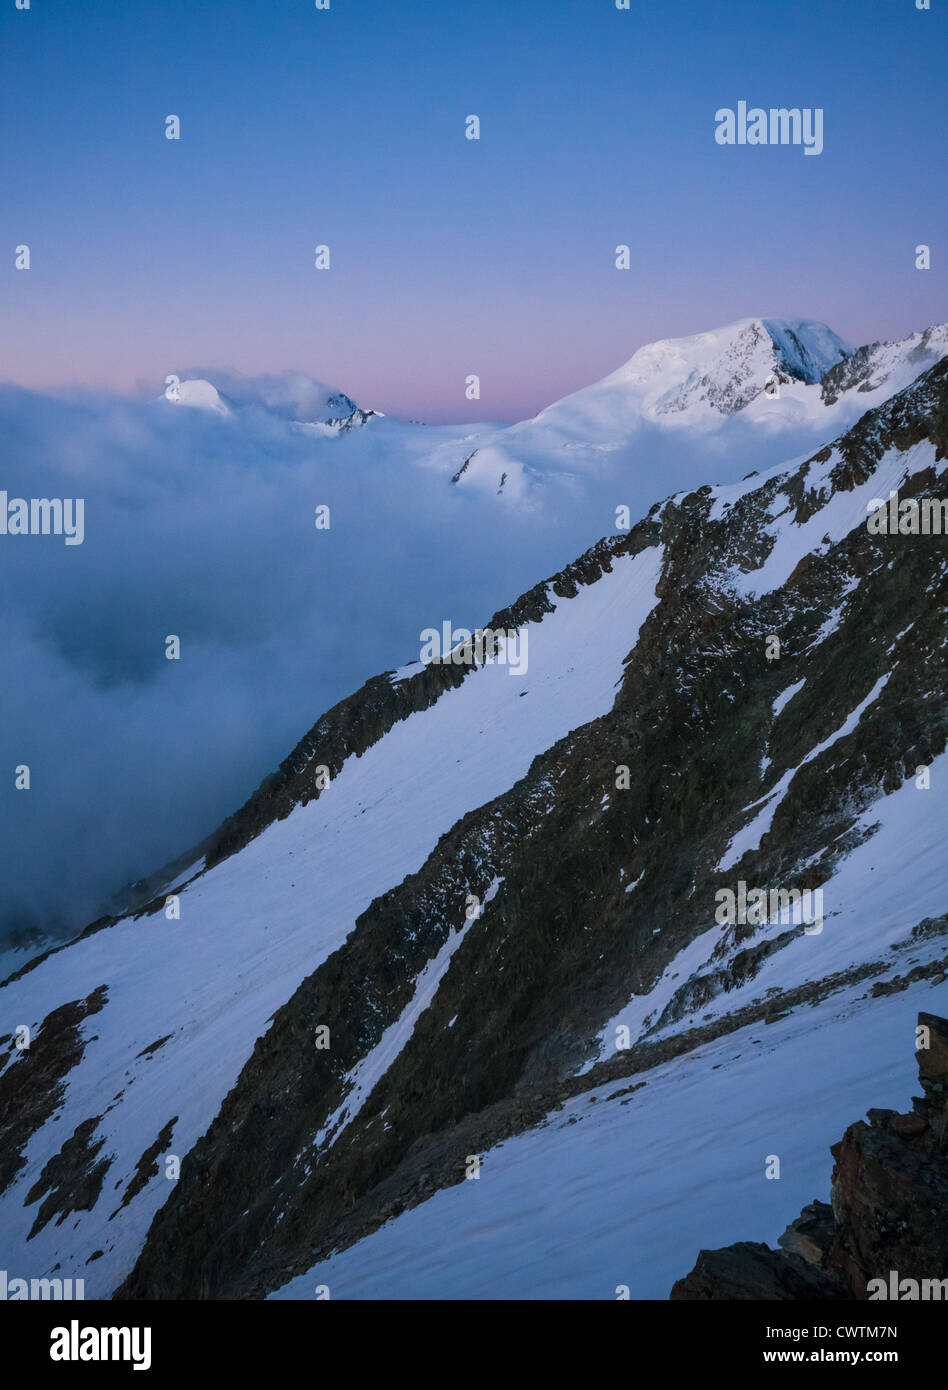 The snow capped summit of Alphubel against the pink and blue dawn sky over Saas Fee in the Alps. Stock Photo